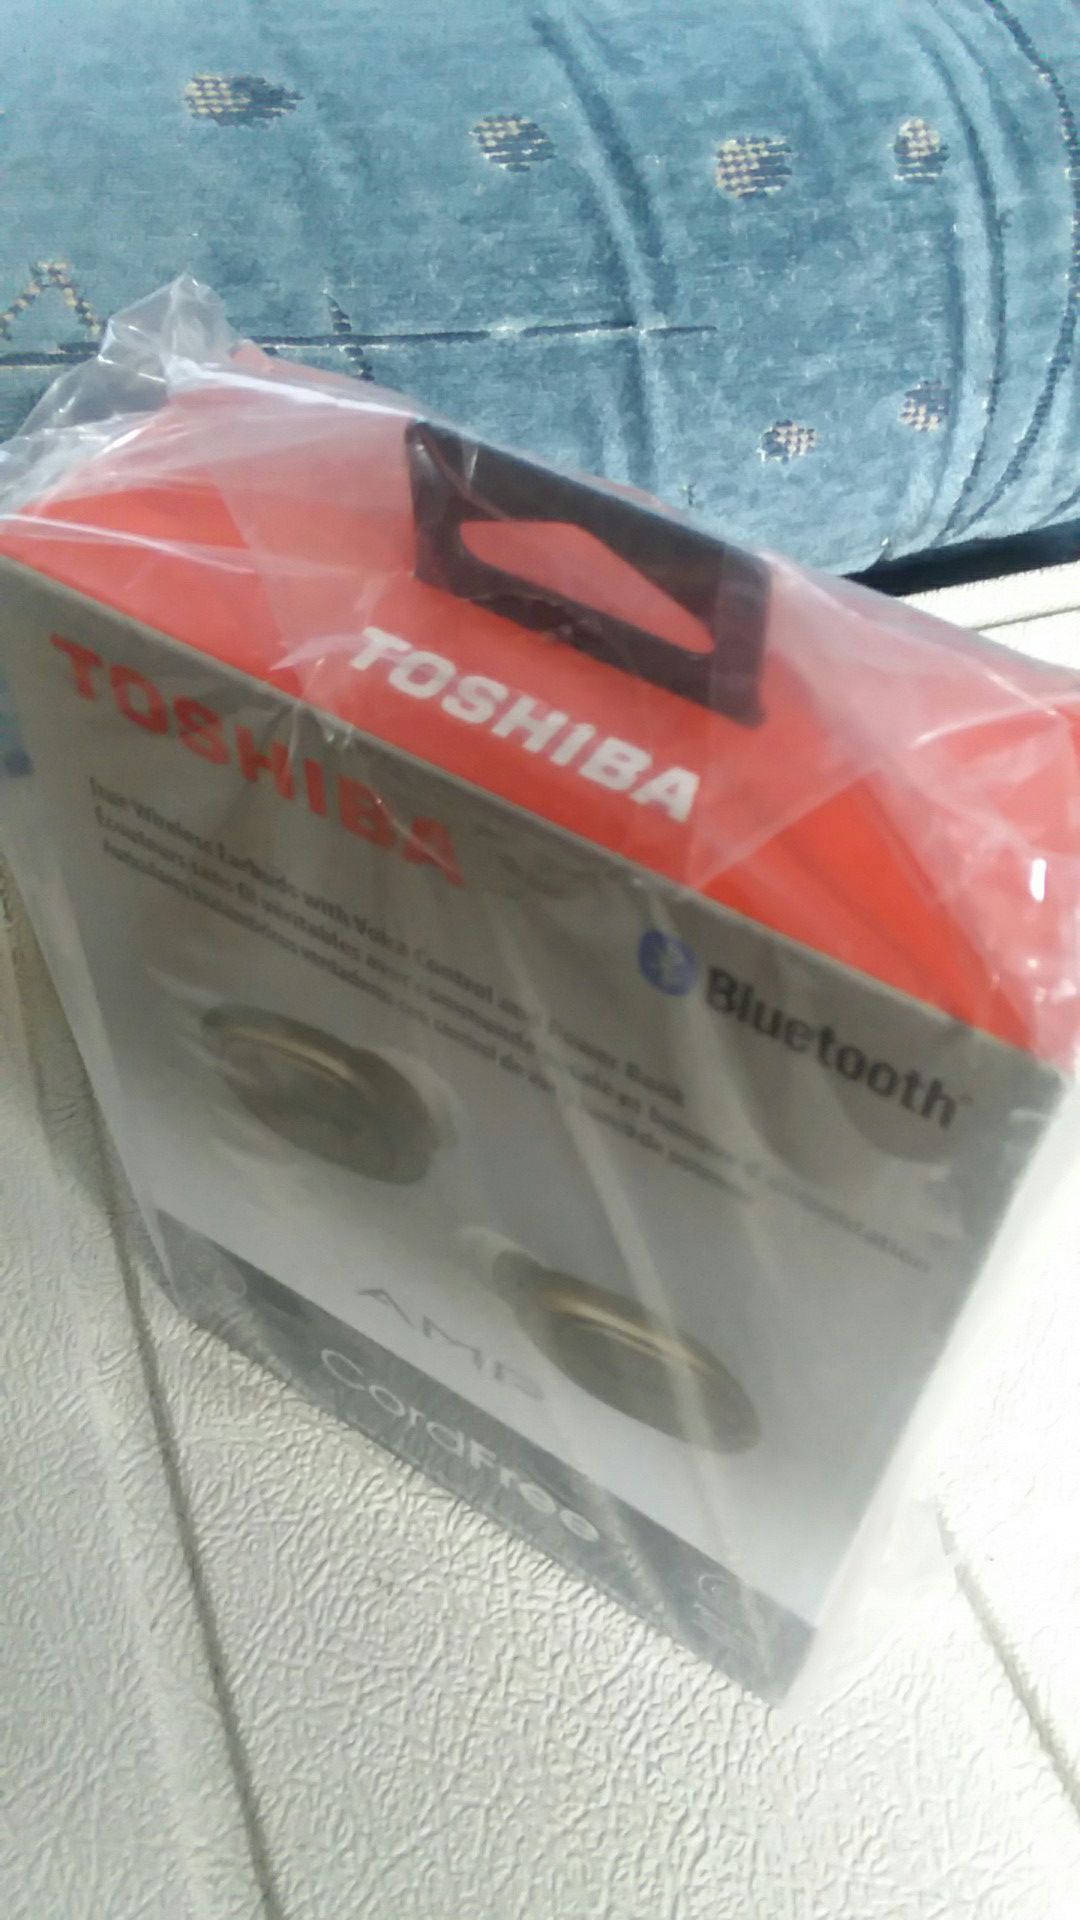 Toshiba Bluetooth Earbuds W/Powerbank Charge Case